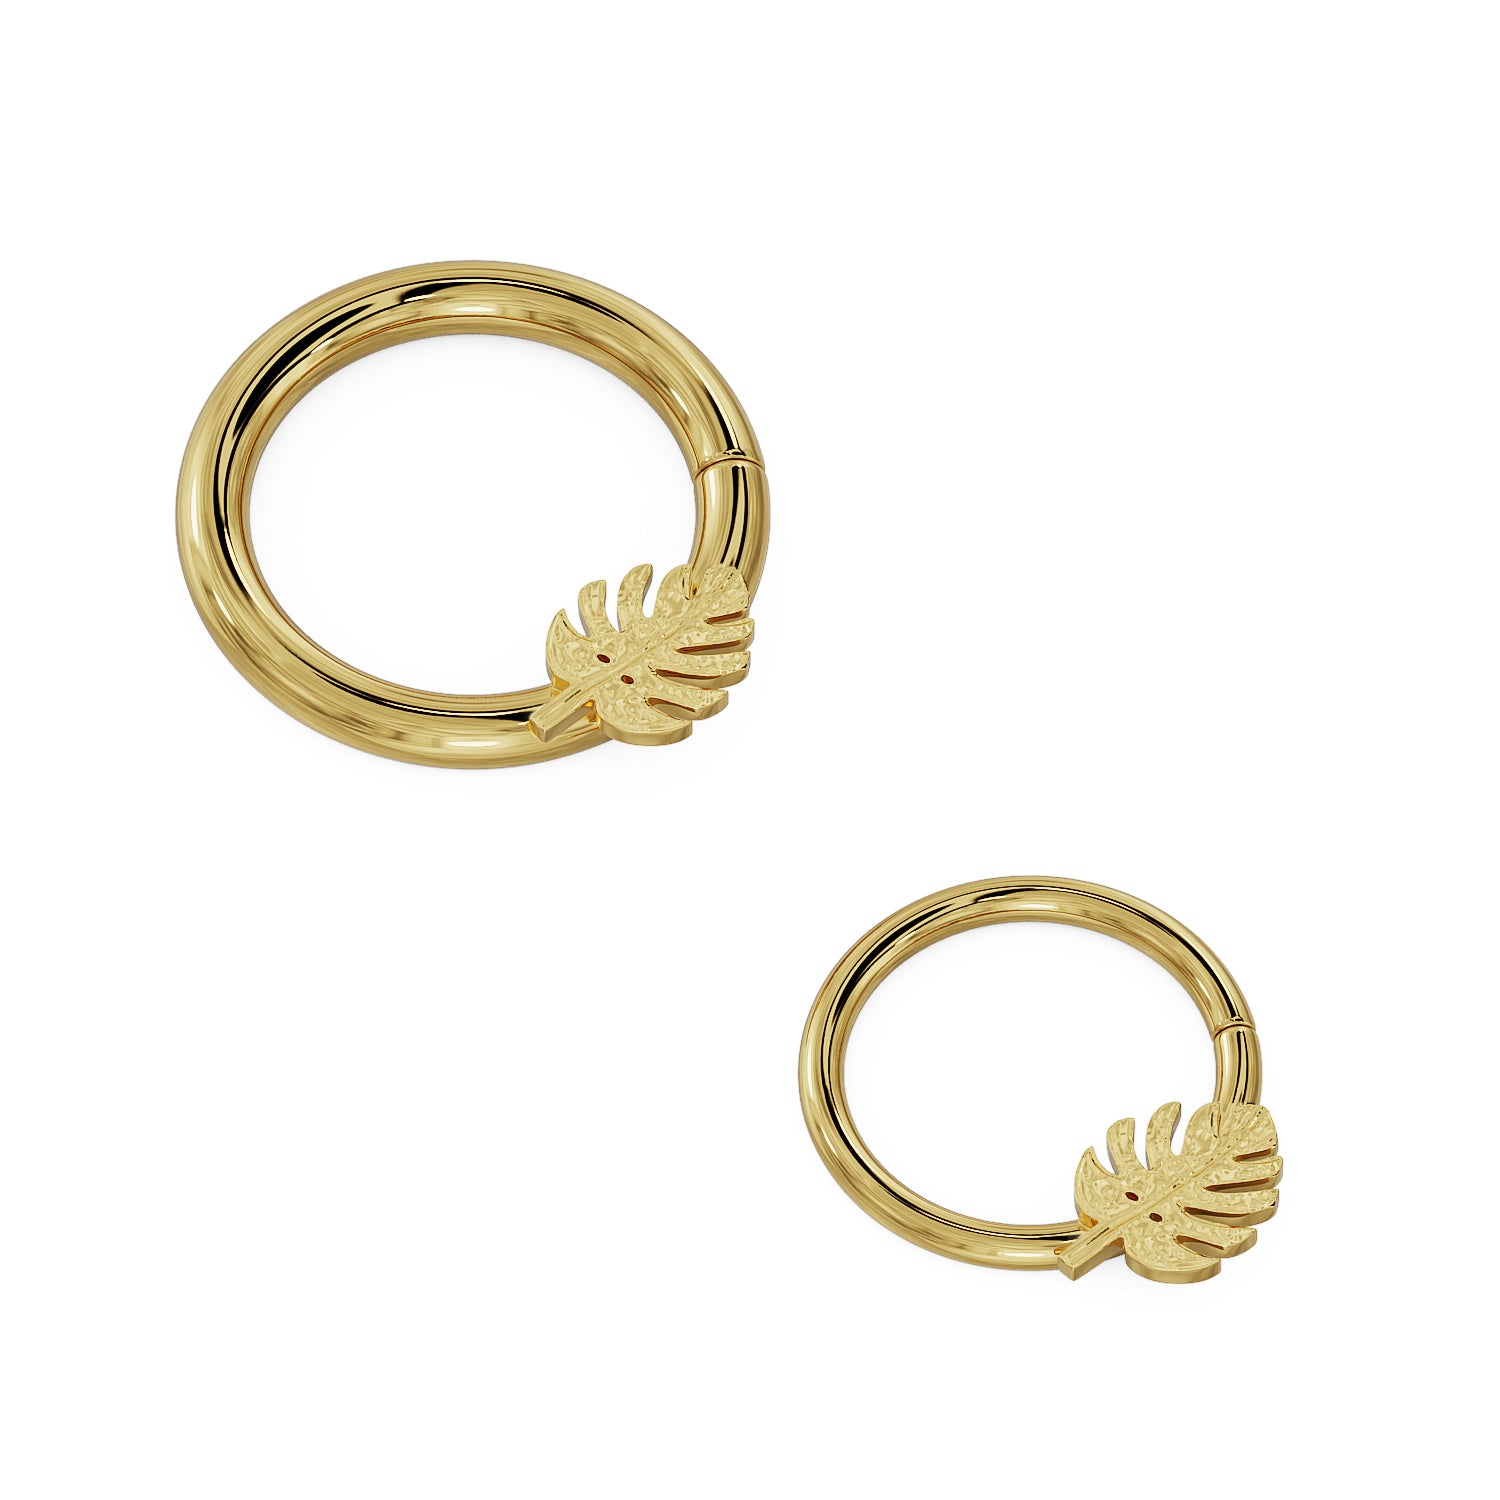 Monstera Deliciosa Palm 14K Gold Flat Back Earring Rose / 16g (1.2mm) 5/16 (8mm) Quality Jewelry Made in USA